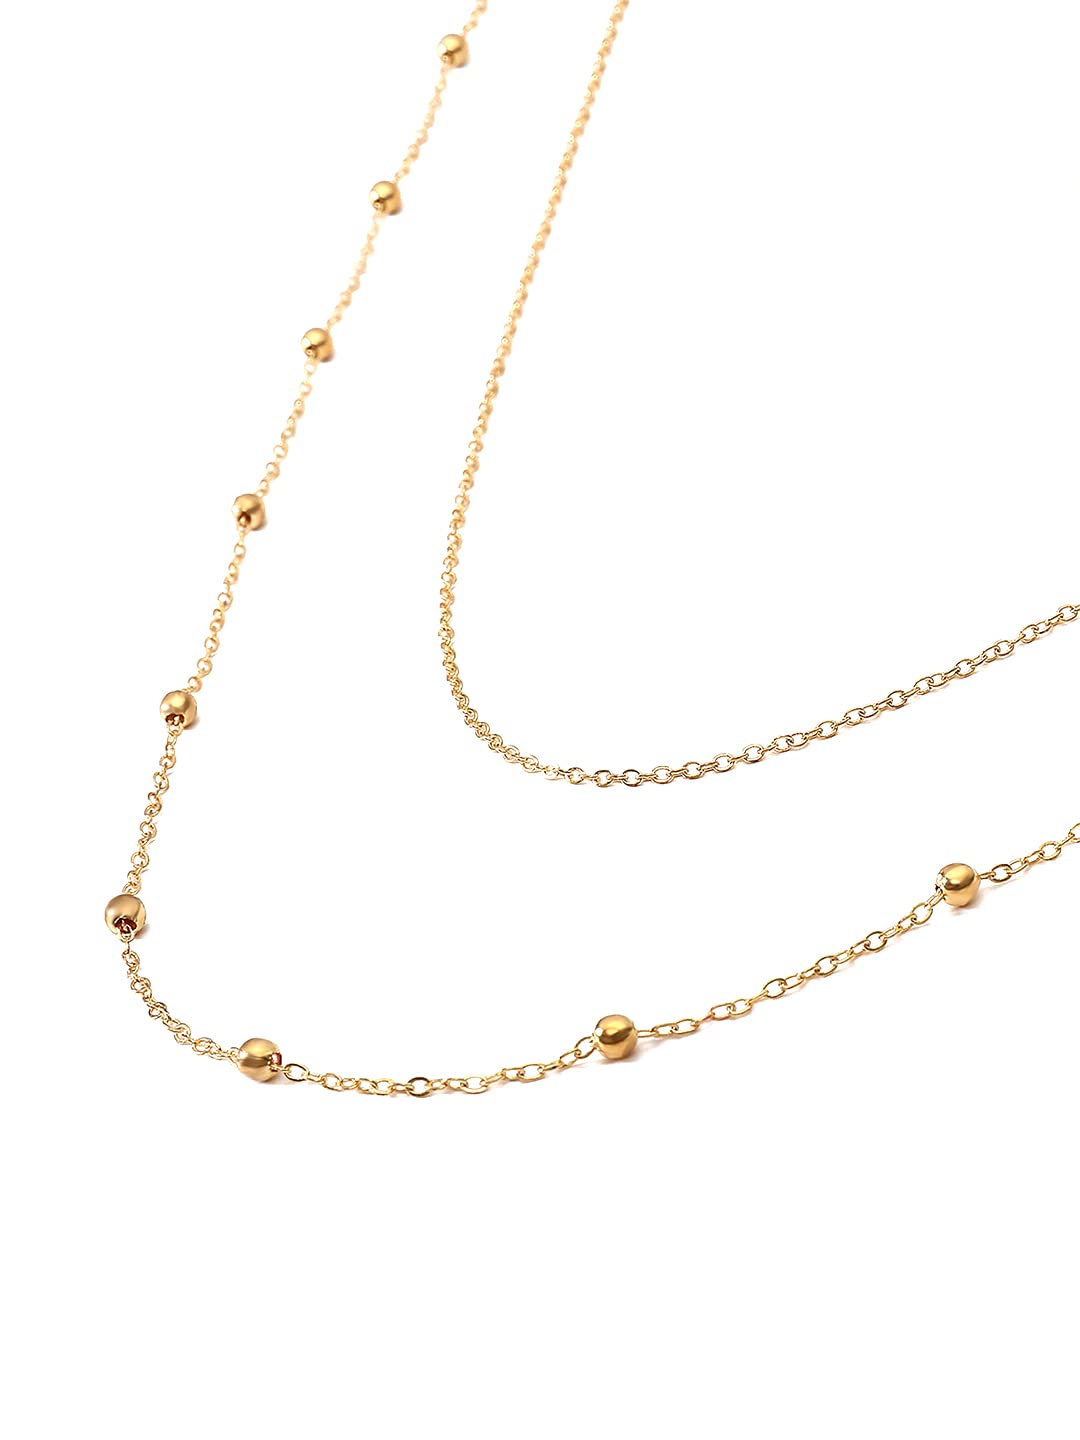 Yellow Chimes Back Necklace For Women Gold Tone Beads Layered Back Chain For Women and Girls